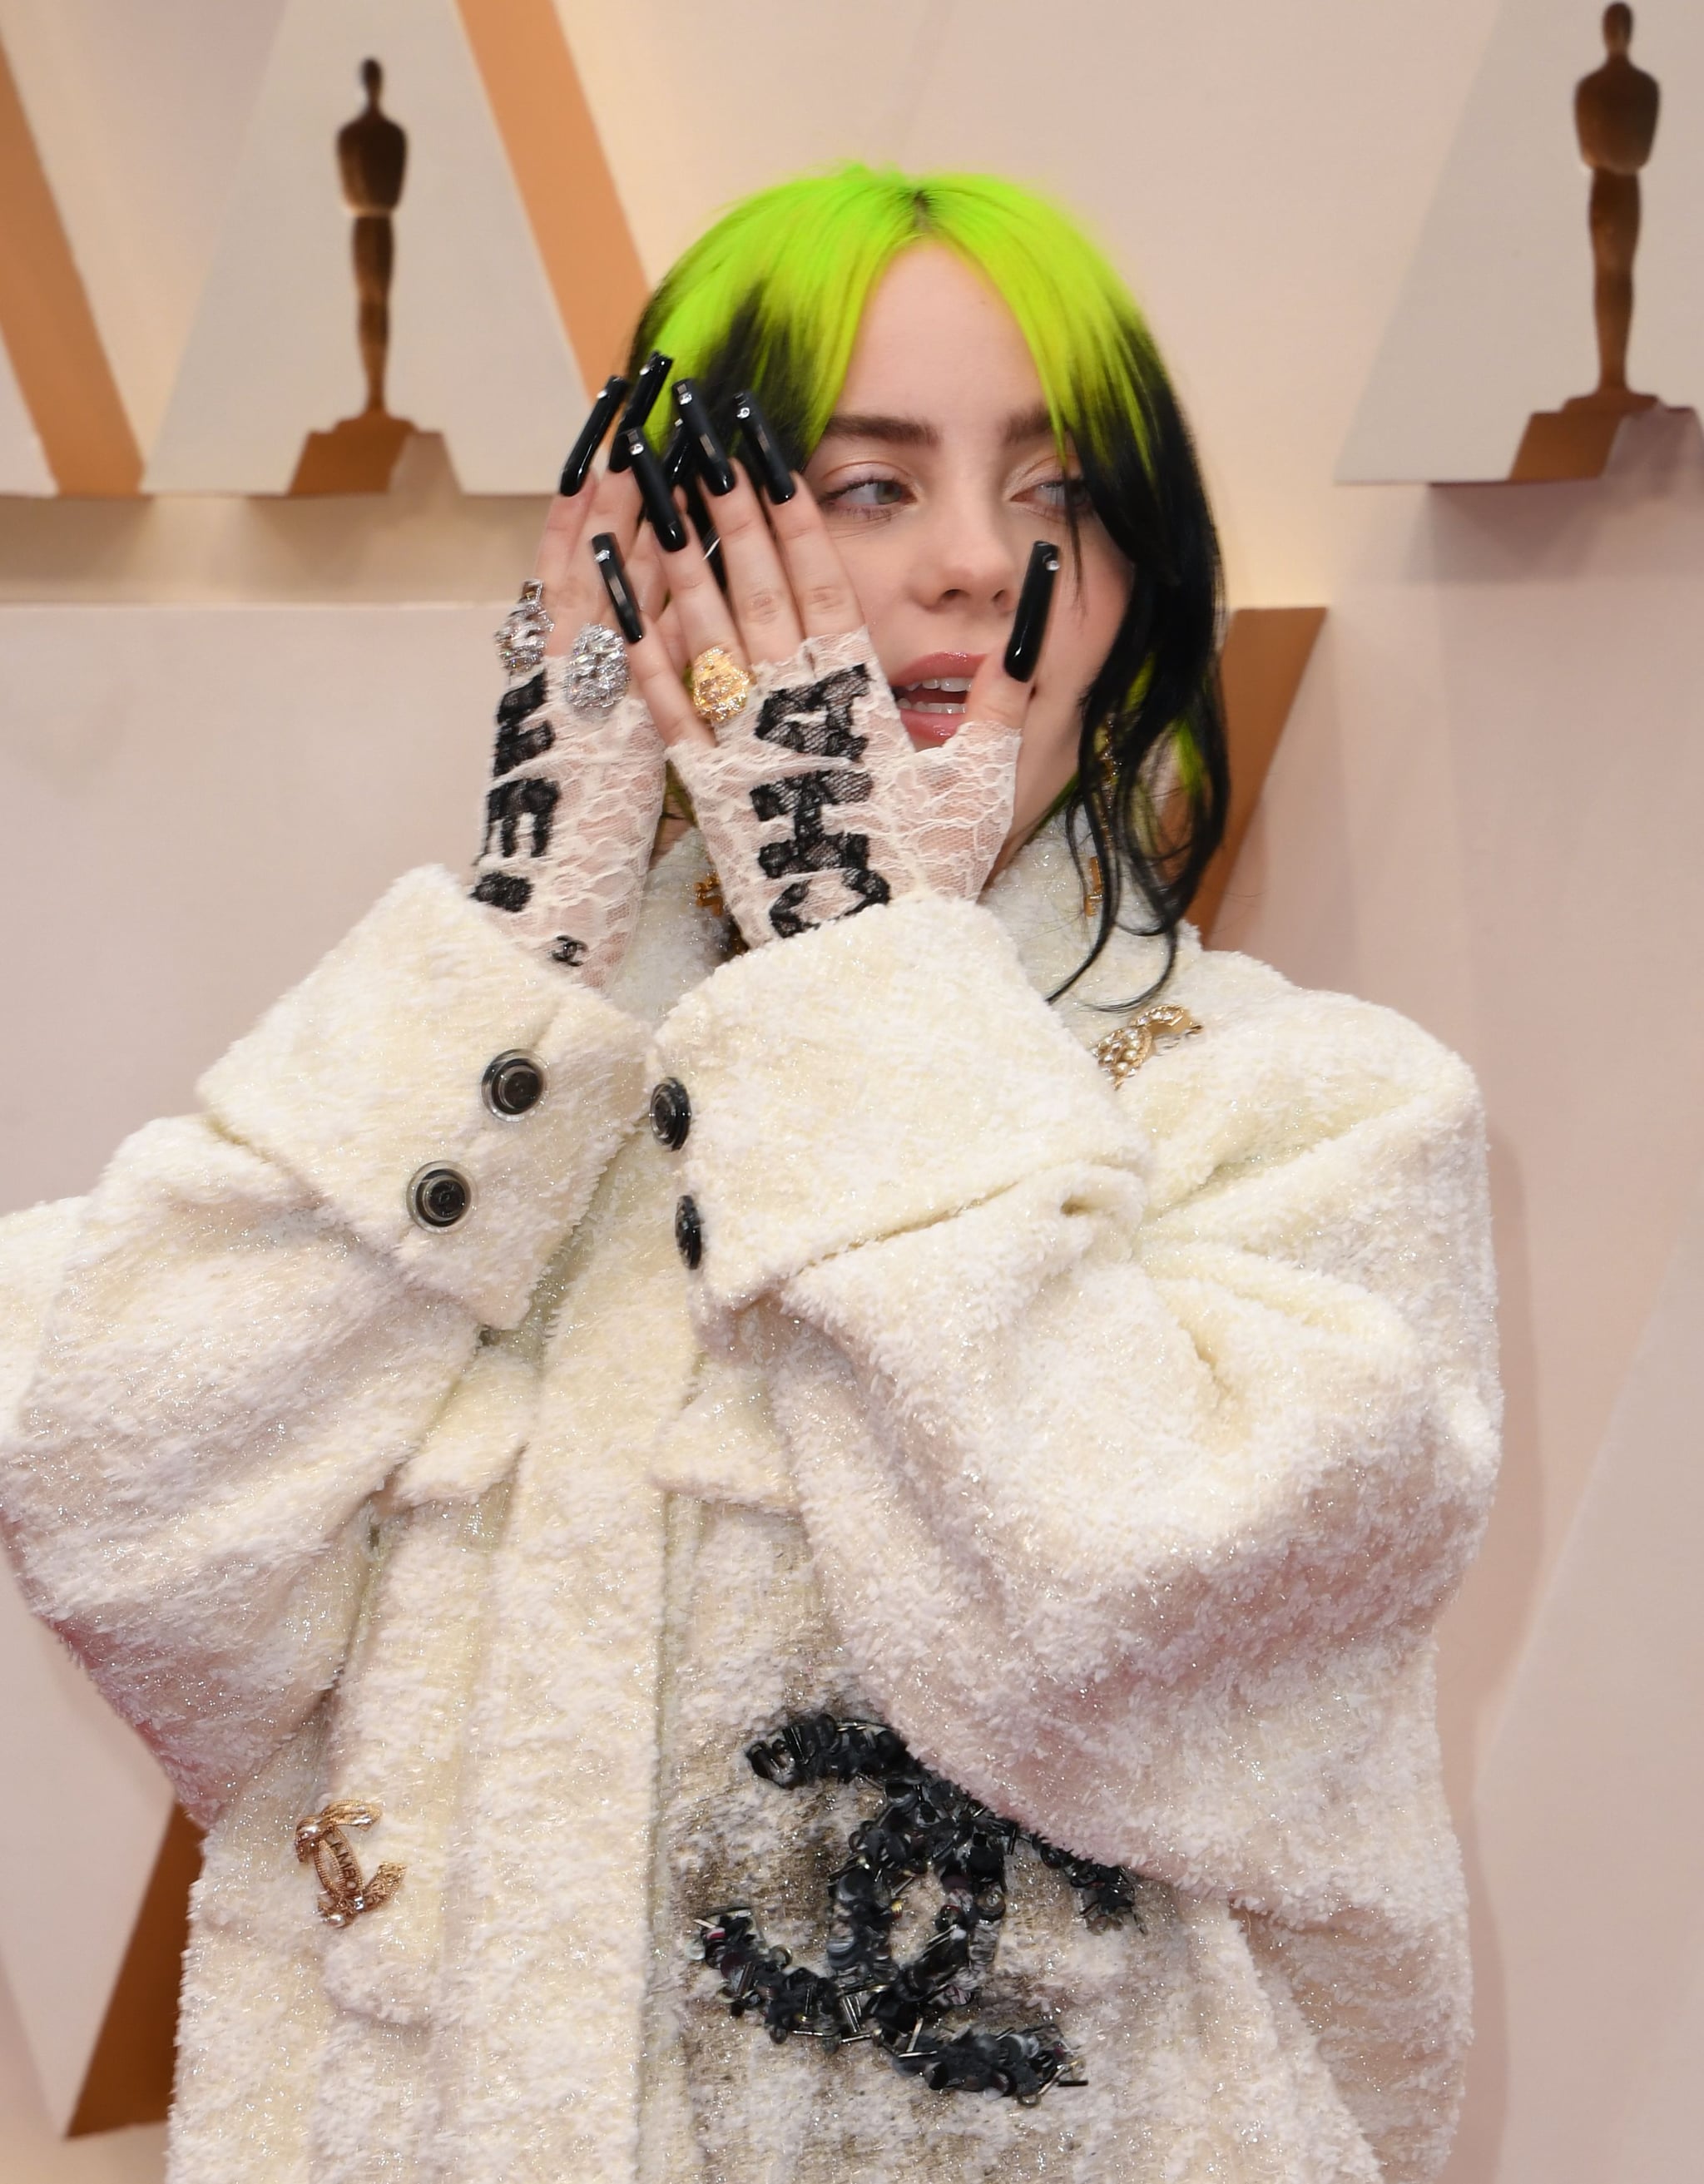 Billie Eilish's White Chanel Tweed Suit at the 2020 Oscars |